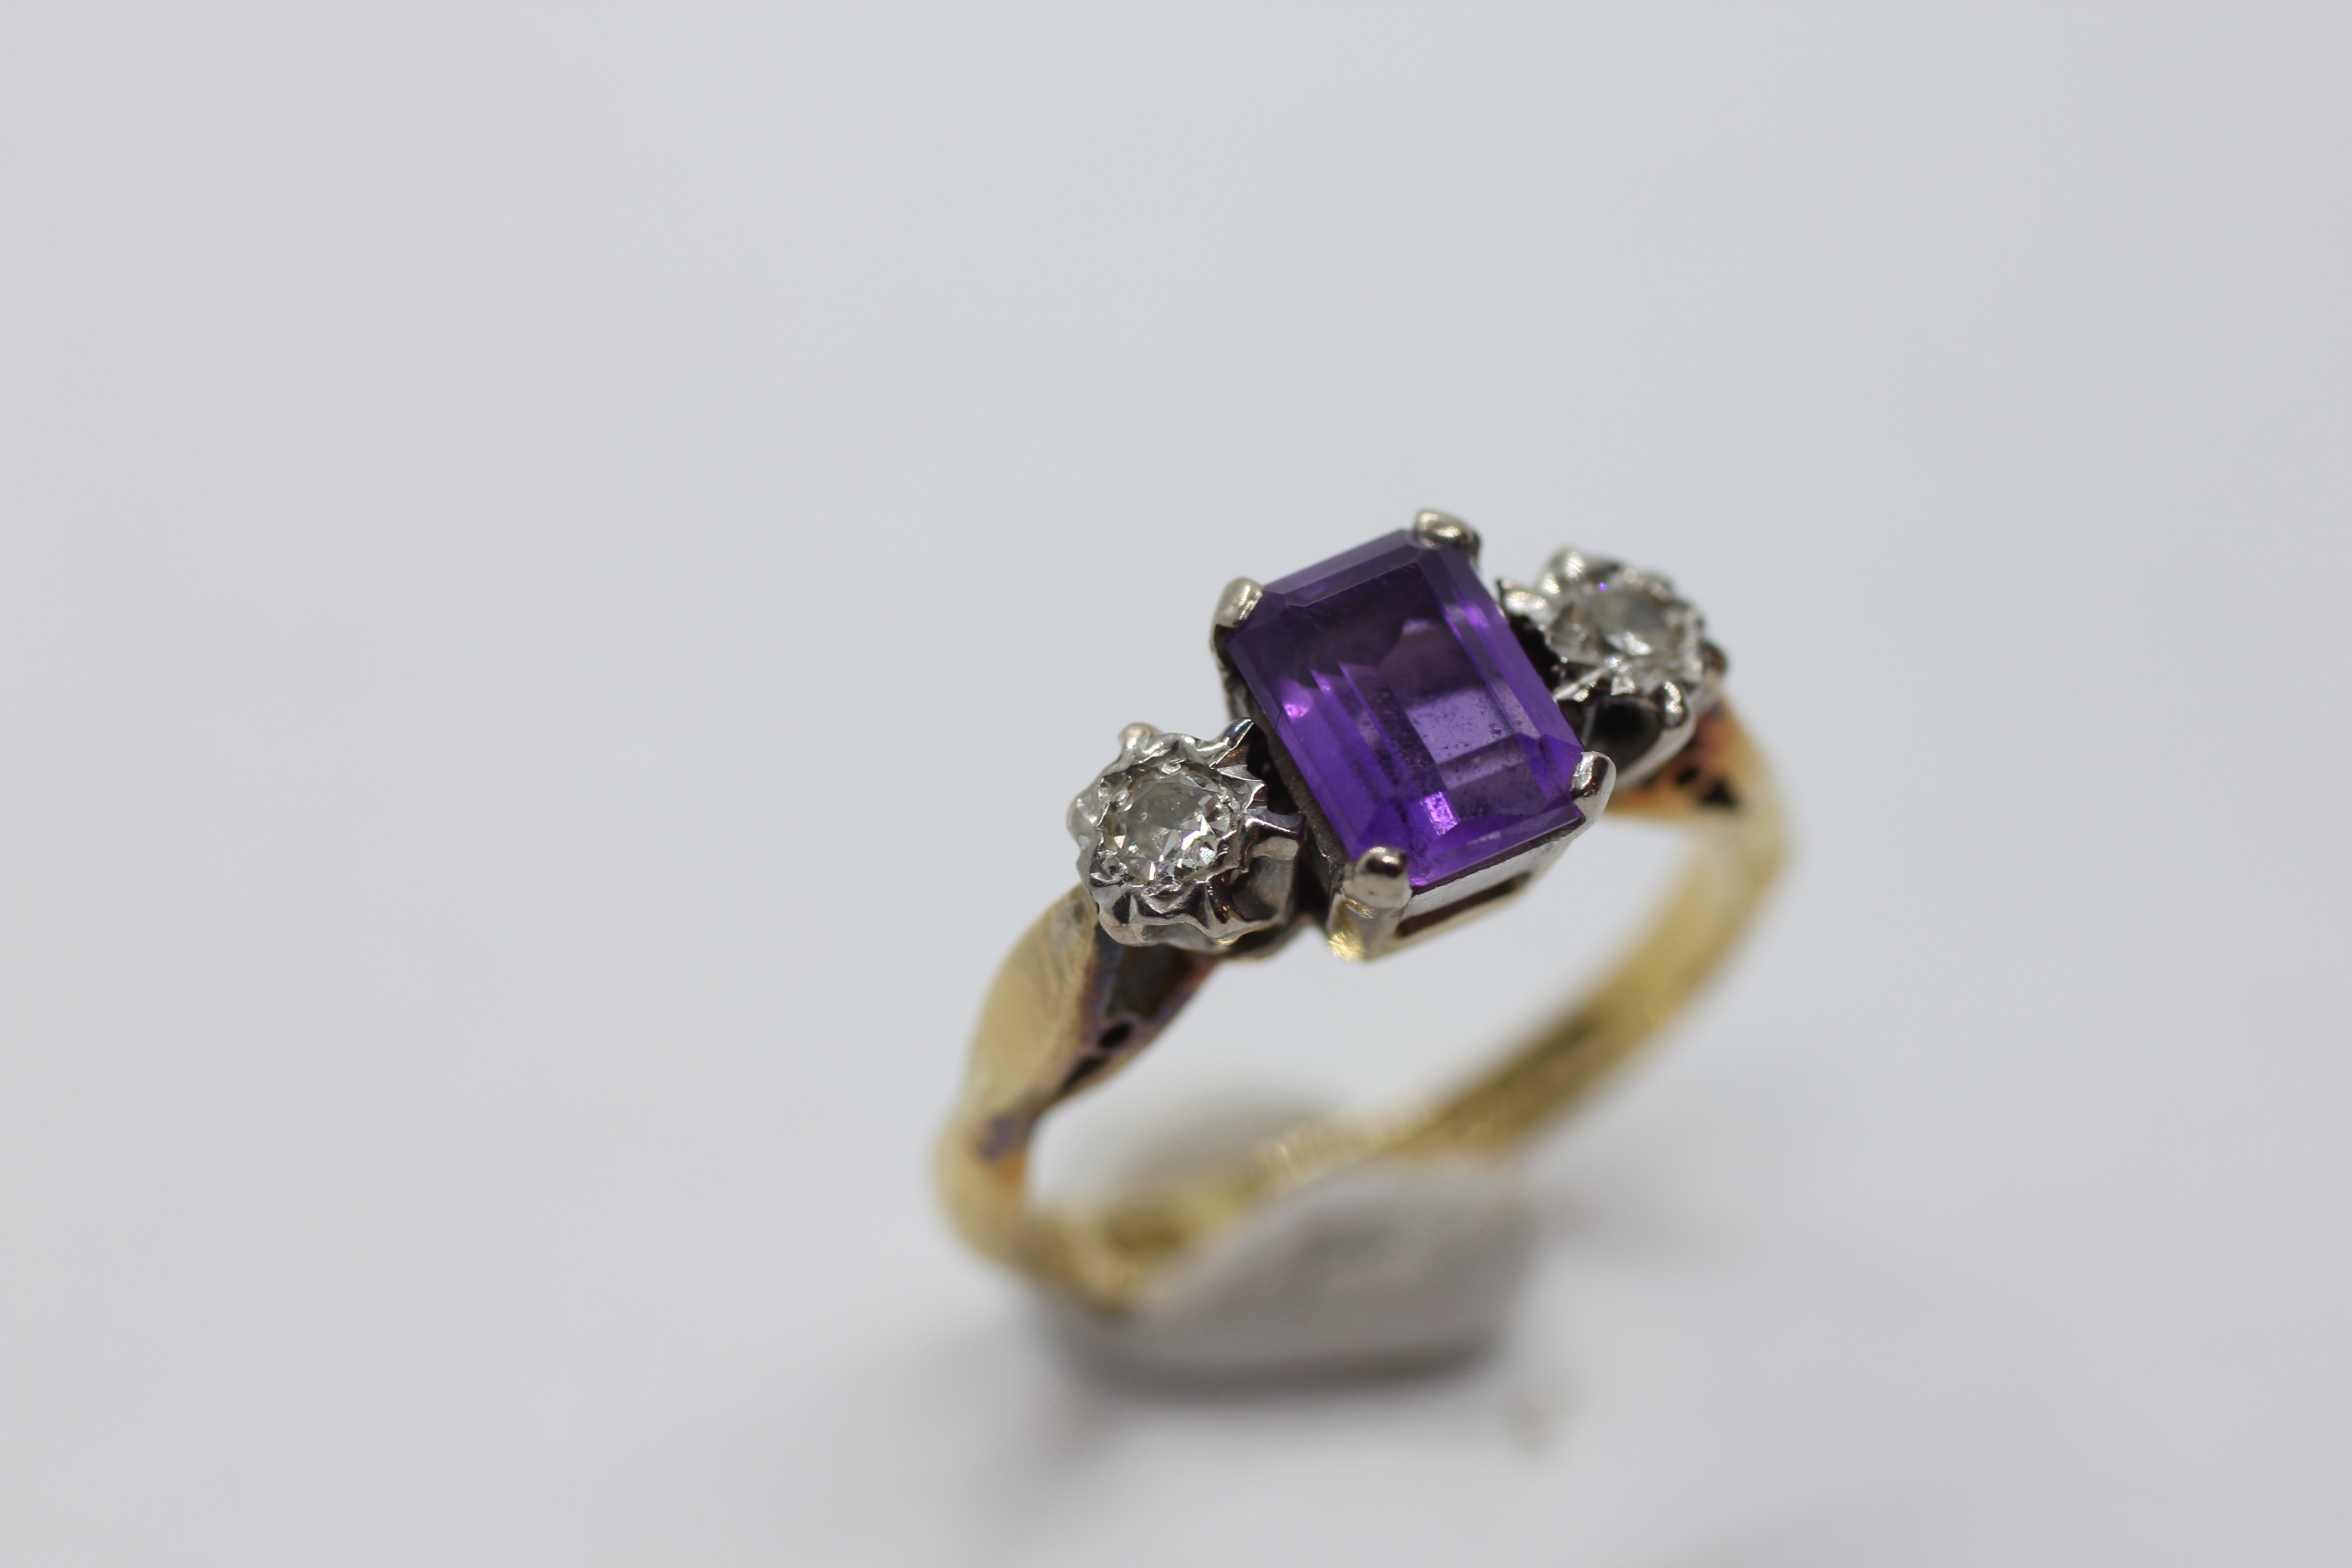 AN 18CT GOLD RING SET WITH A CENTRAL EMERALD CUT AMETHYST AND A DIAMOND EITHER SIDE. - Image 3 of 7